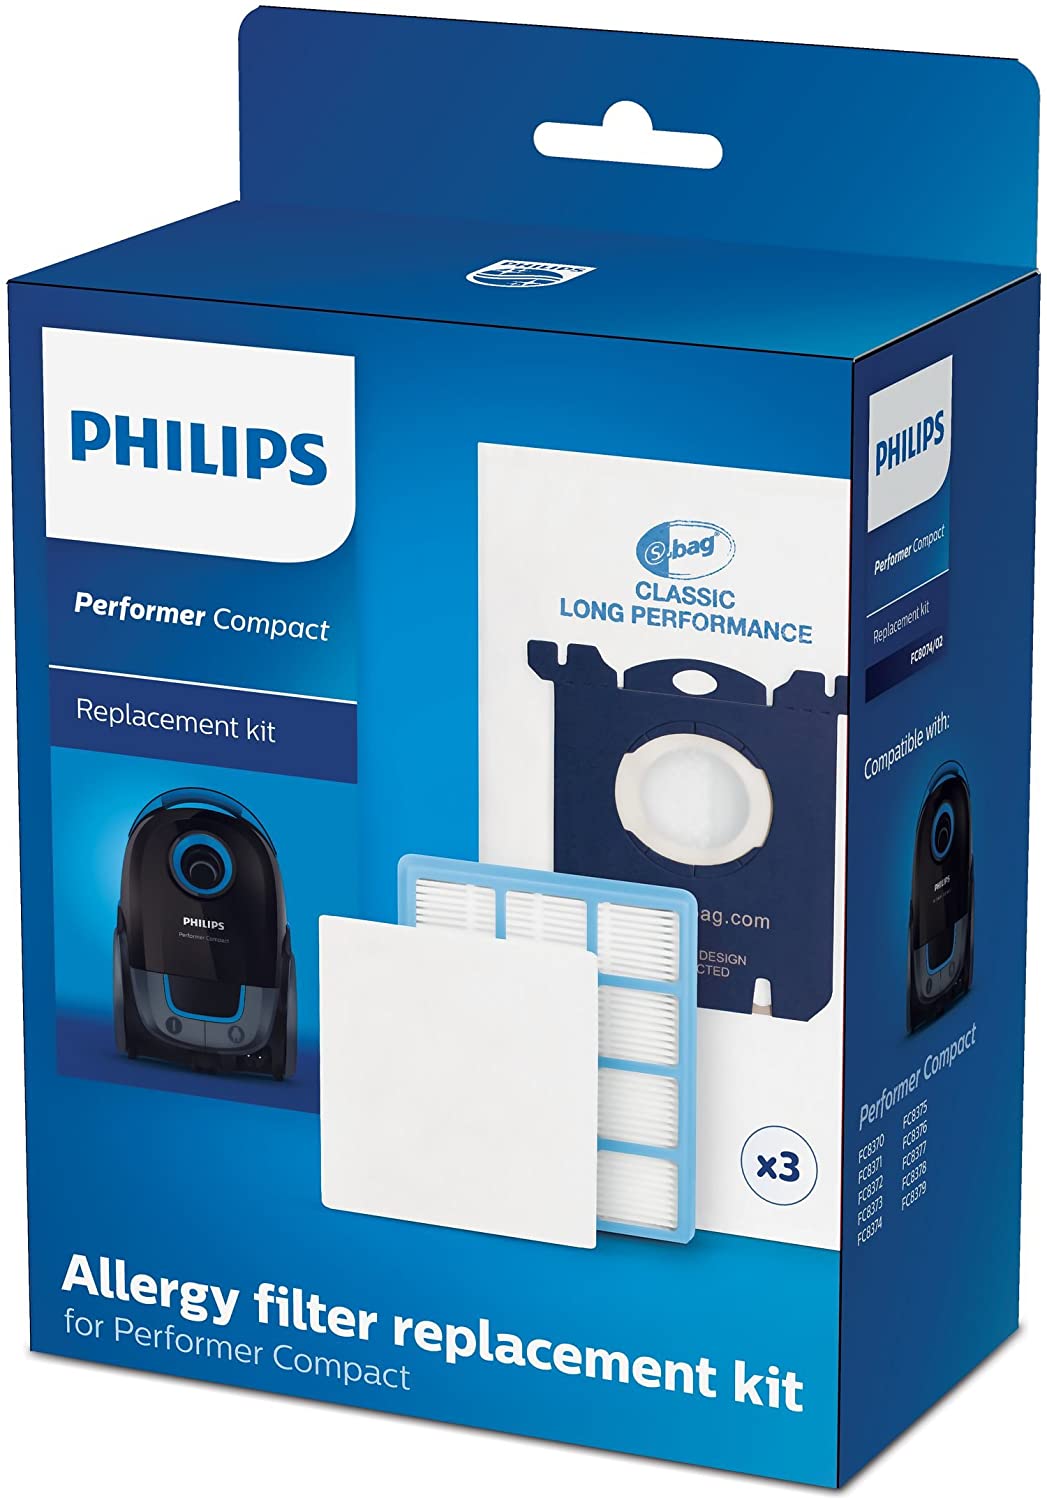 Philips Replacement Kit For Performer Compact - FC8074